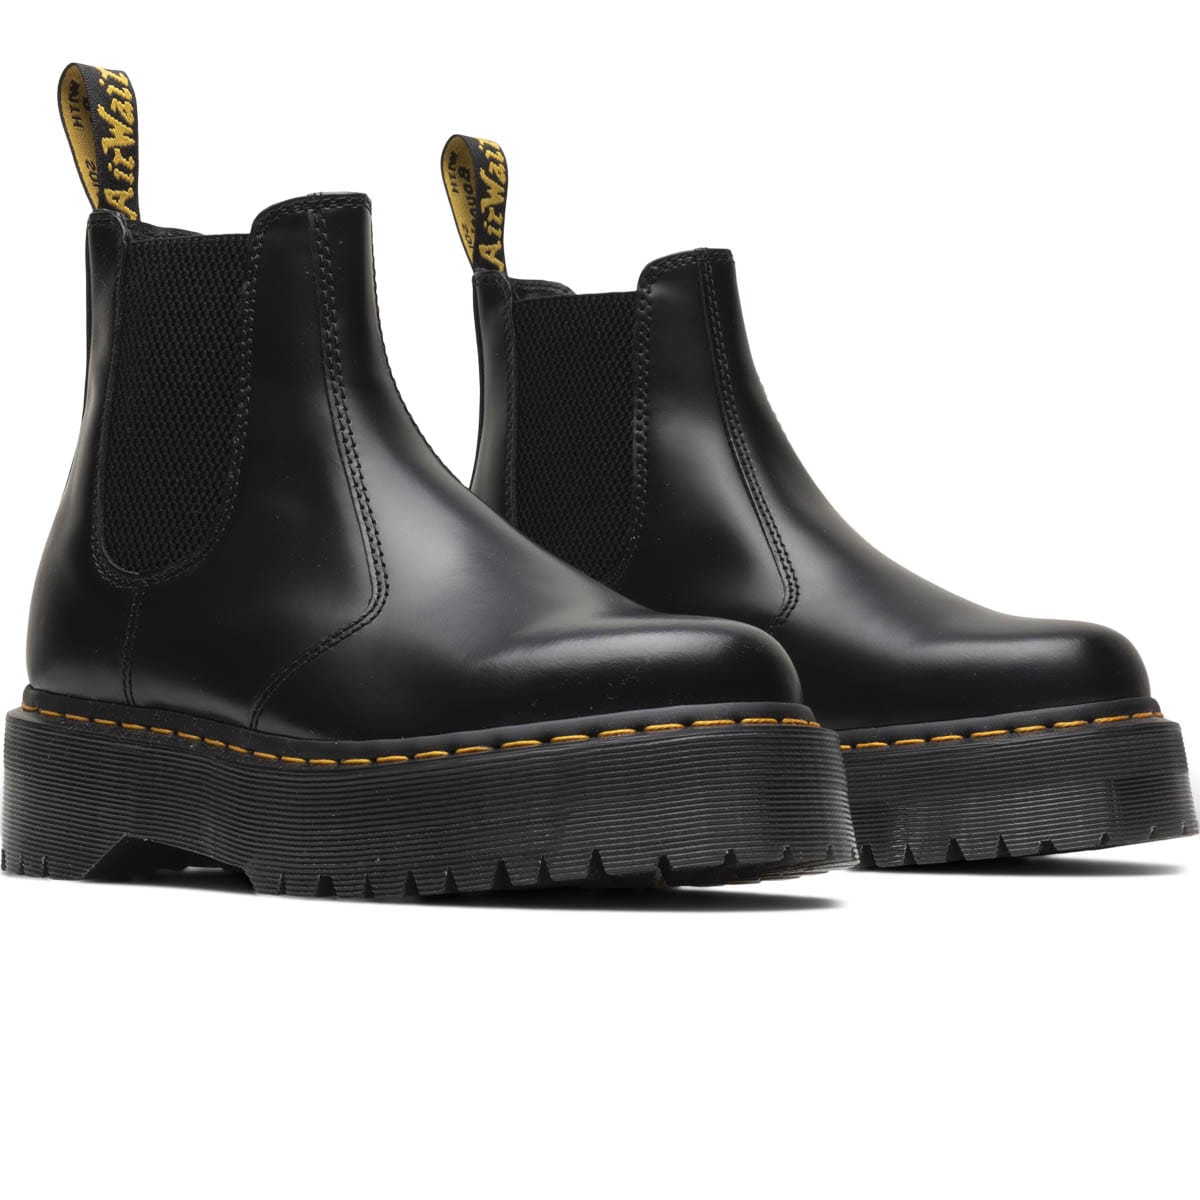 Dr. Martens WOMEN'S 2976 QUAD CHELSEA BOOTS BLACK POLISHED SMOOTH